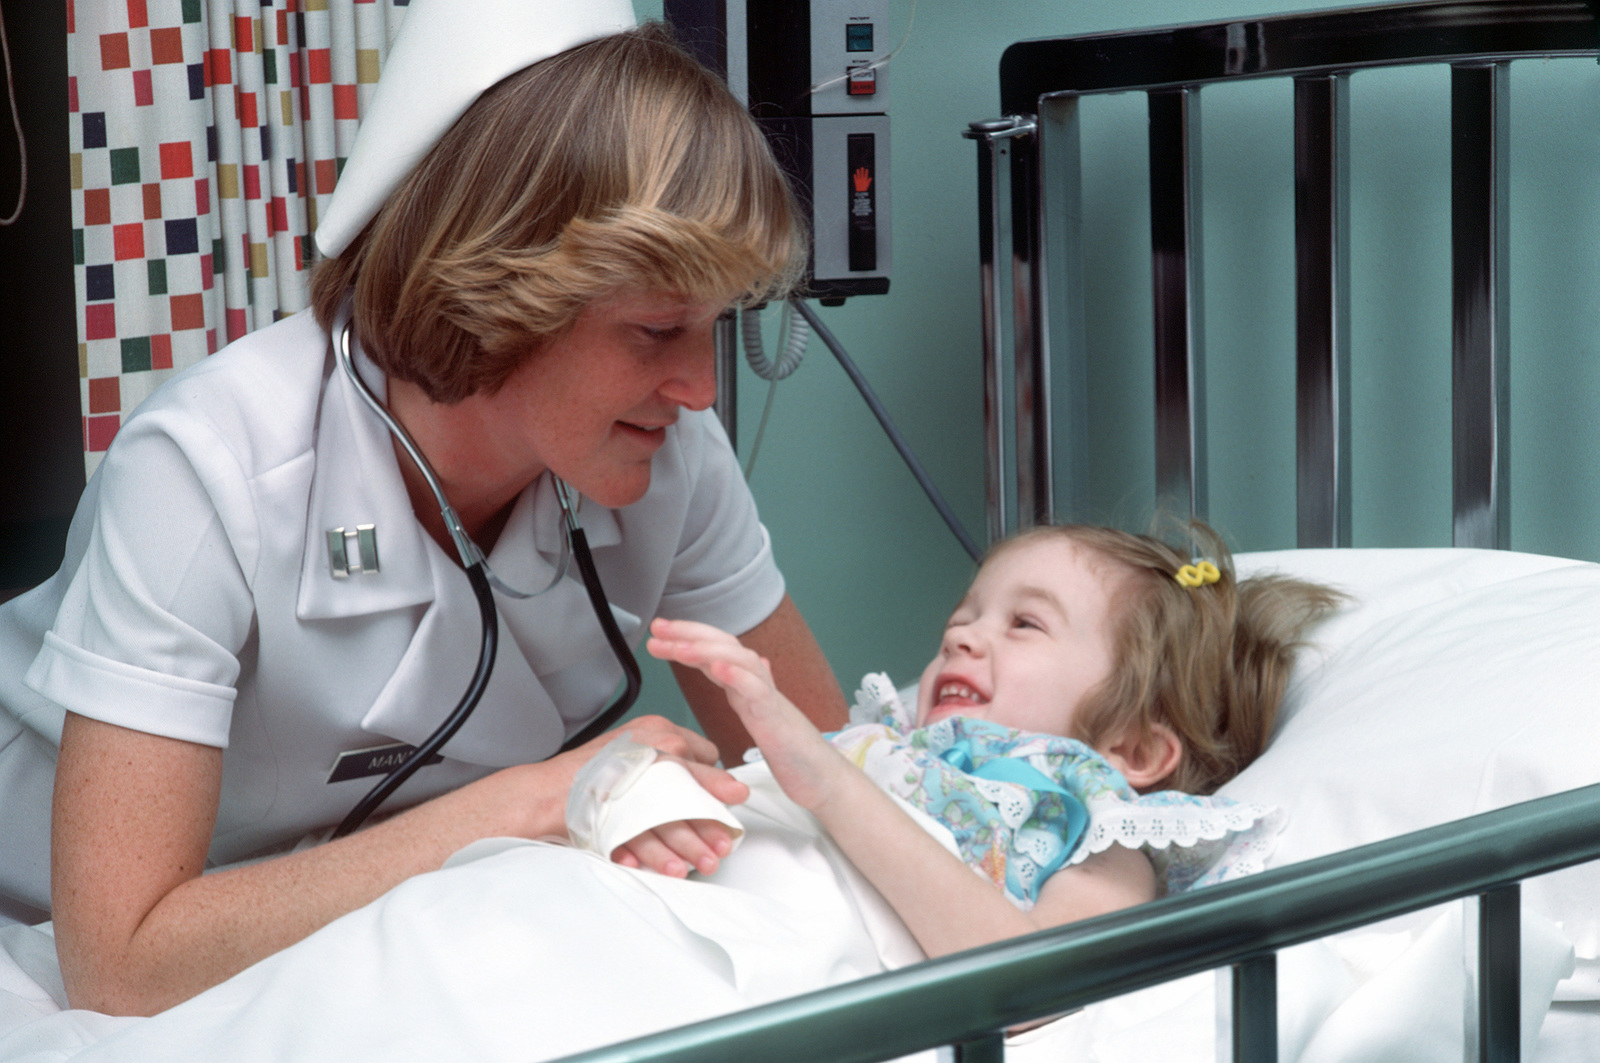 A little about the medical nursing profession